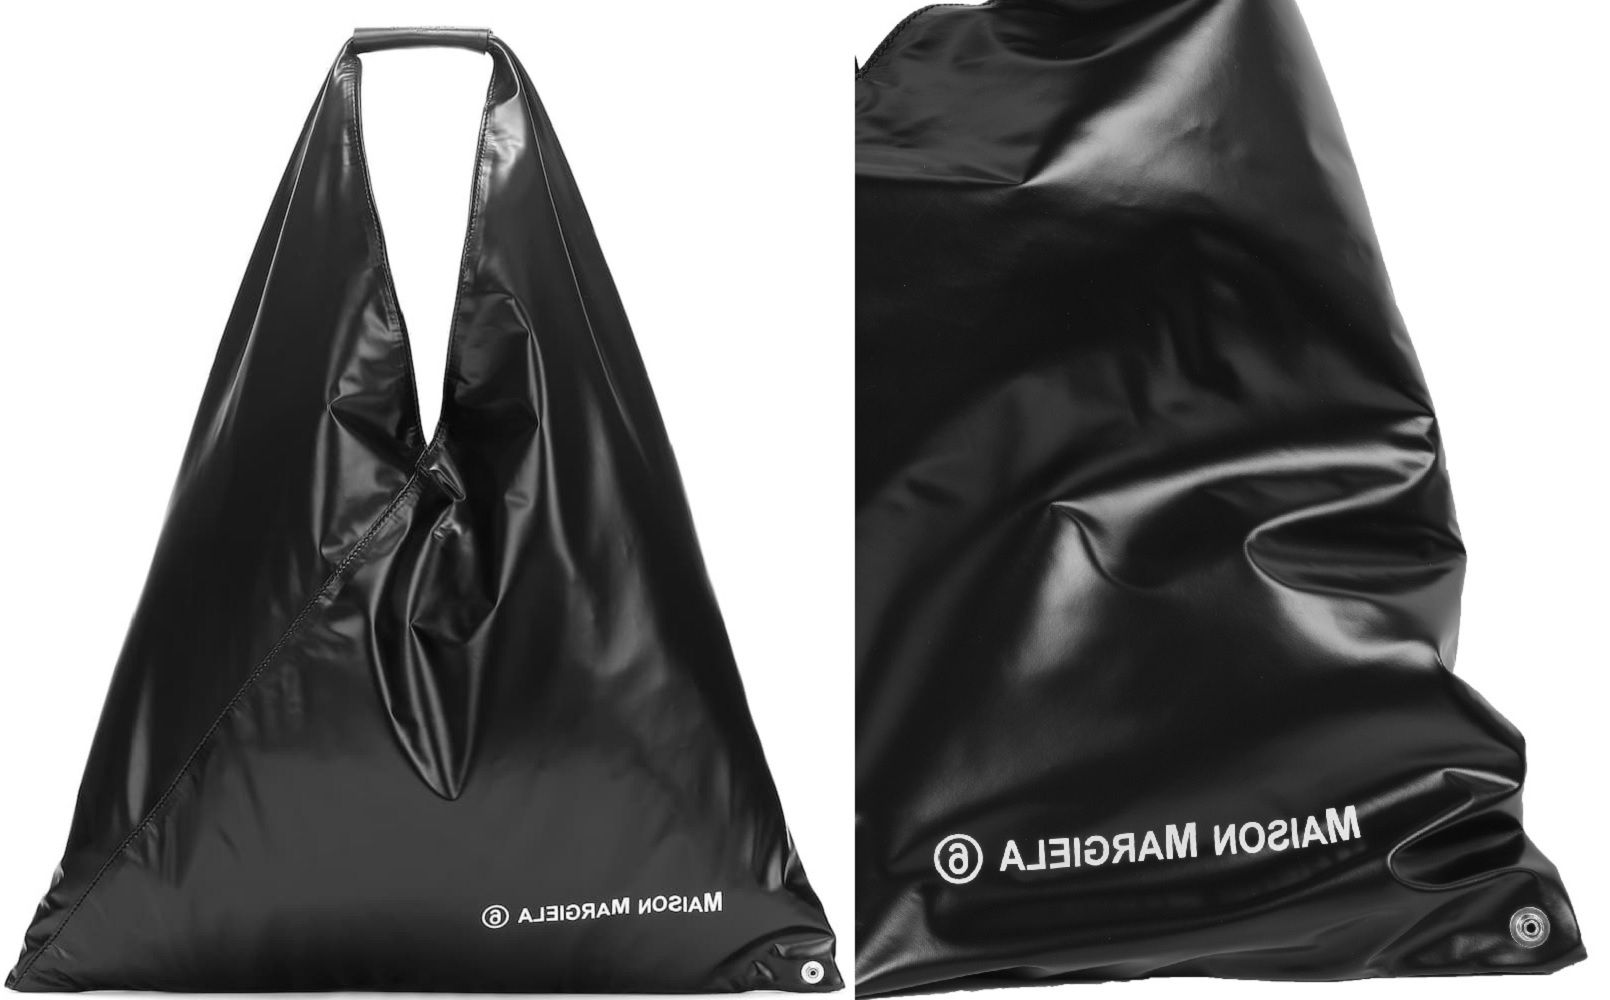 The Japanese bag by MM6 Maison Margiela turns 10 years old